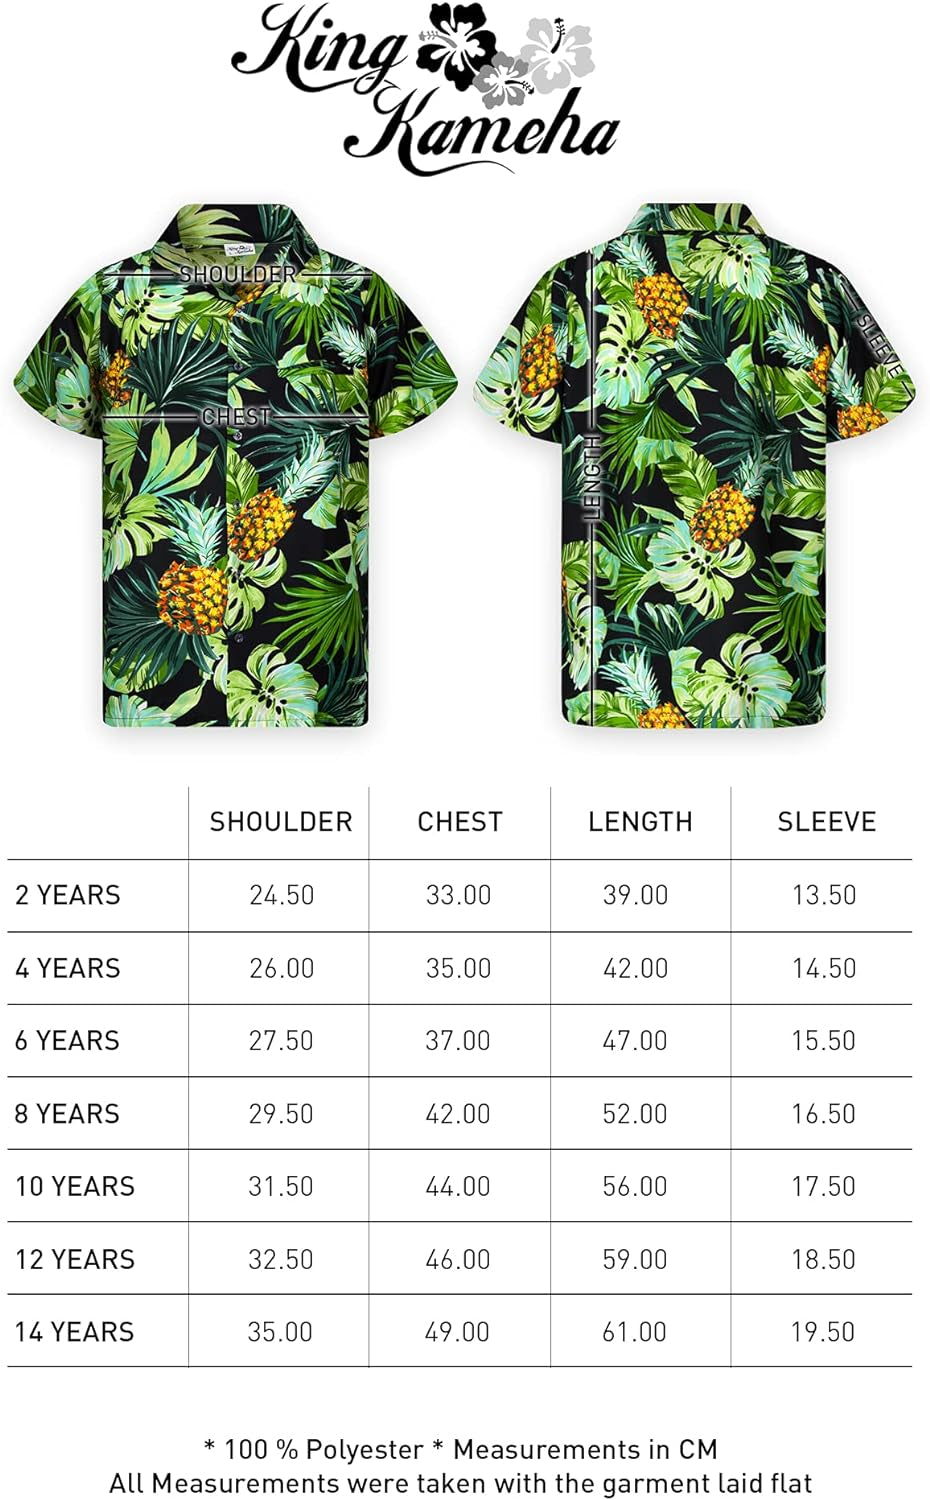 Funky Casual Hawaiian Shirt for Kids Boys and Girls Front Pocket Shortsleeve Unisex Pineapple Flowers Print